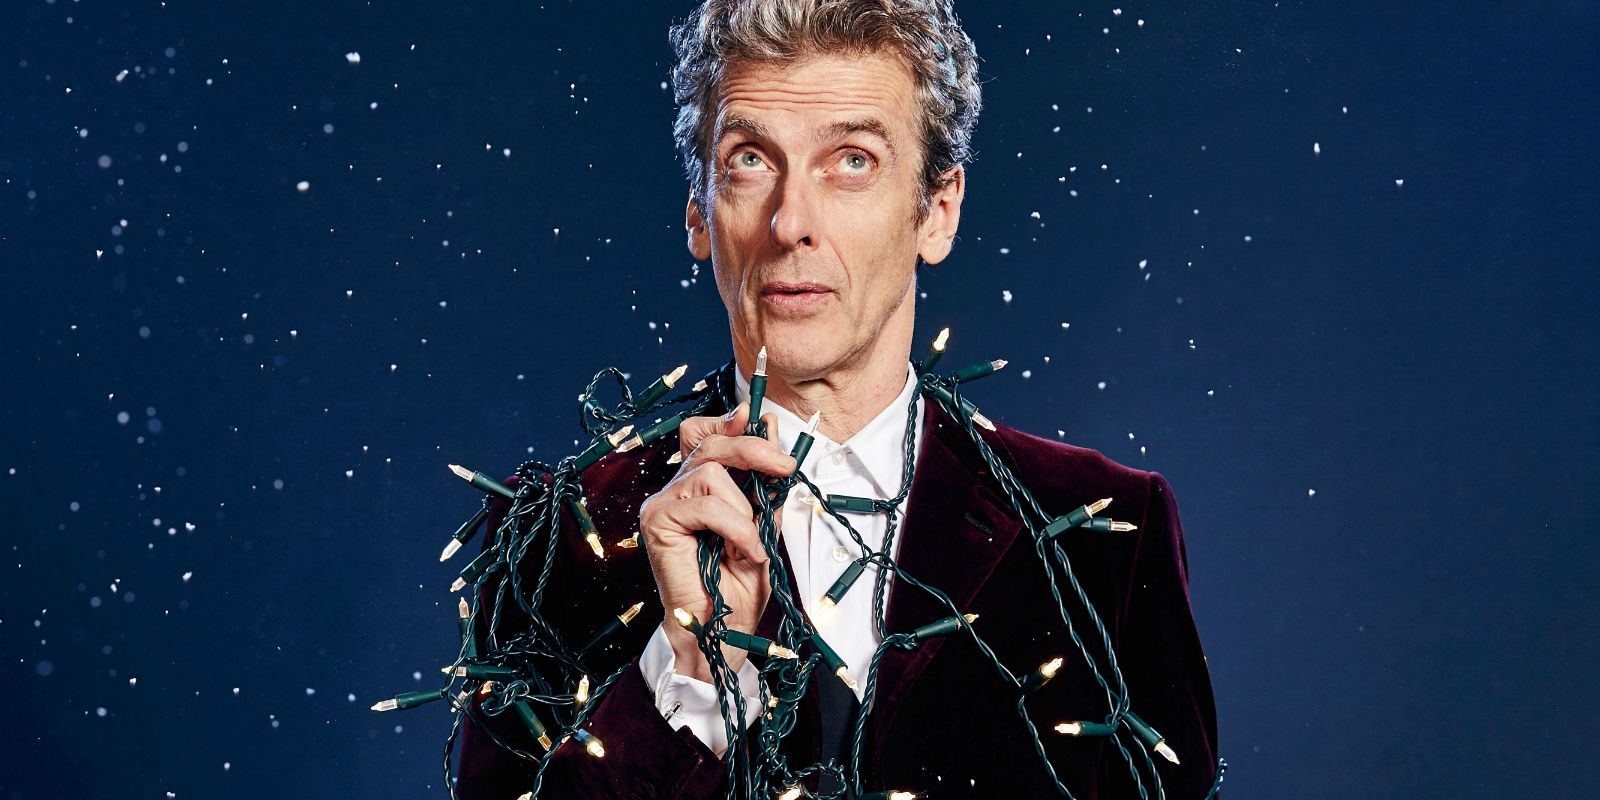 Doctor Who 2016 Christmas special - Peter Capaldi news